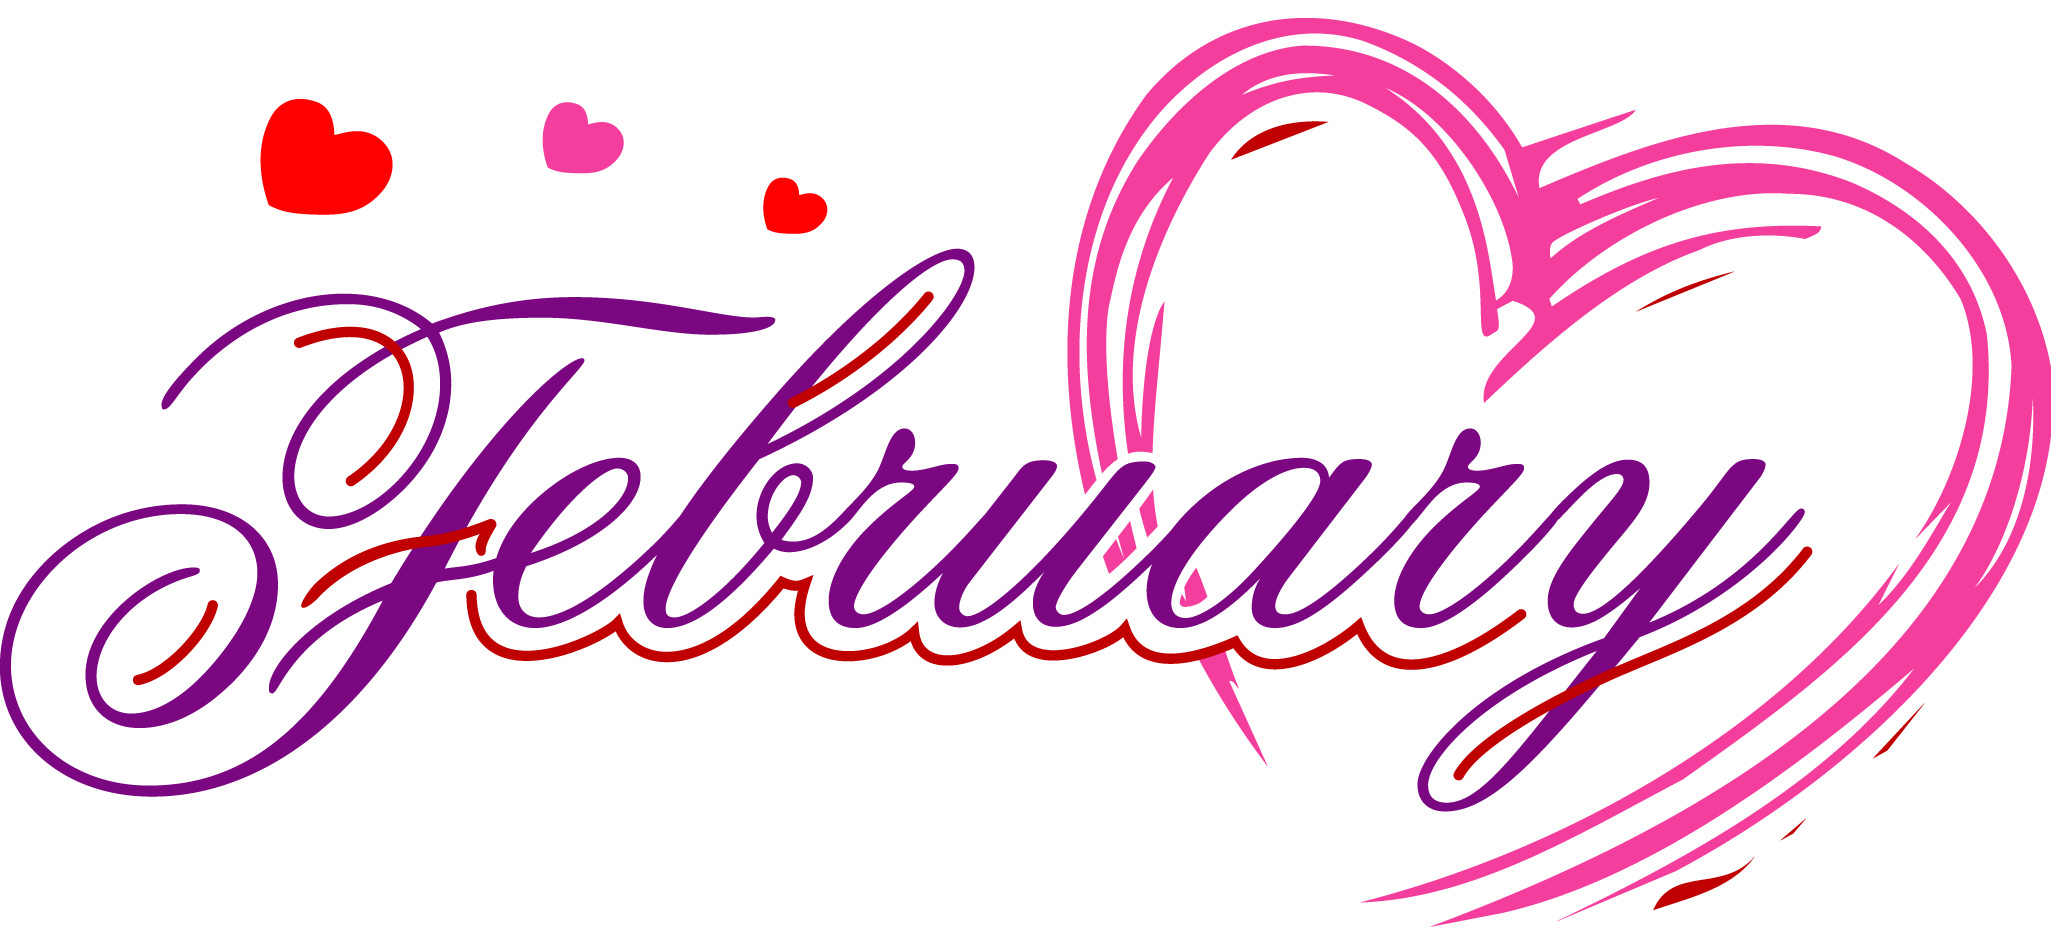 free clipart february Clip Art Library